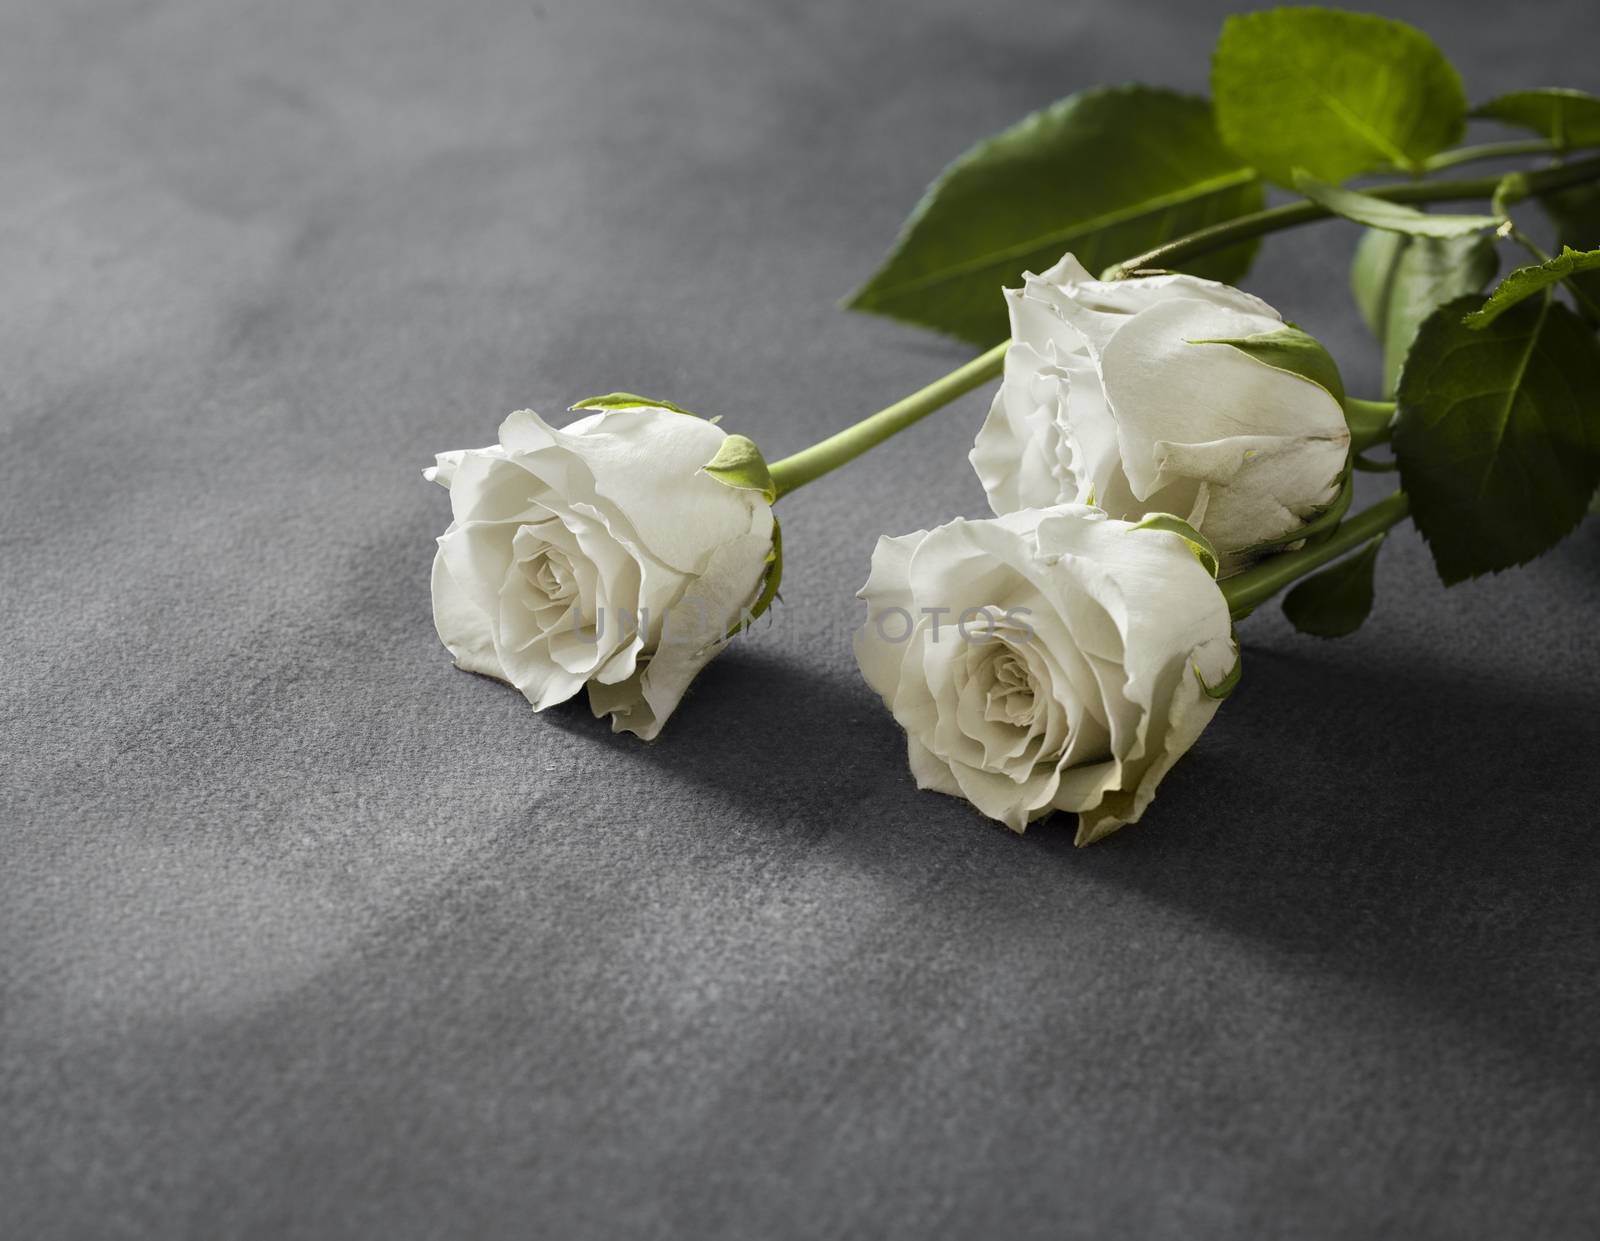 Beautiful white roses on a grey stone background. Funeral symbol by Tjeerdkruse